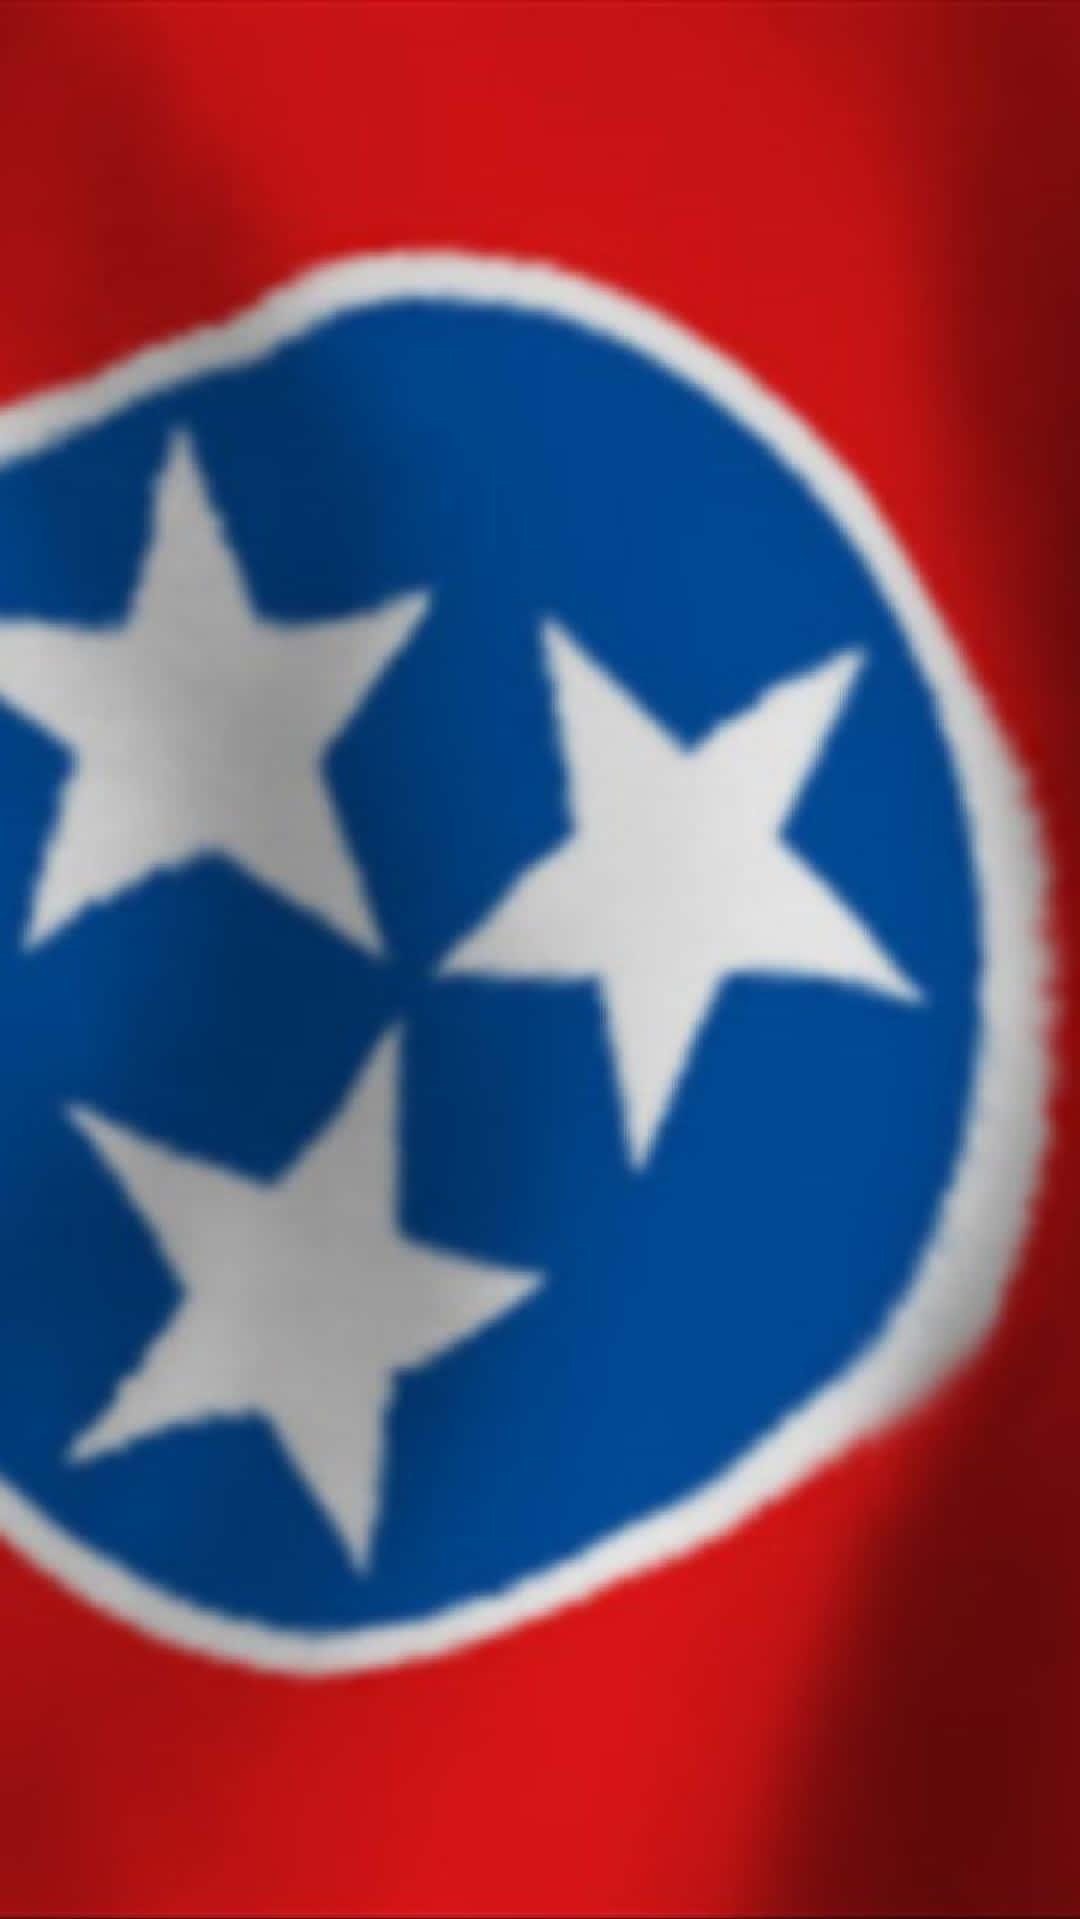 Image An American Flag Of The State Tennessee